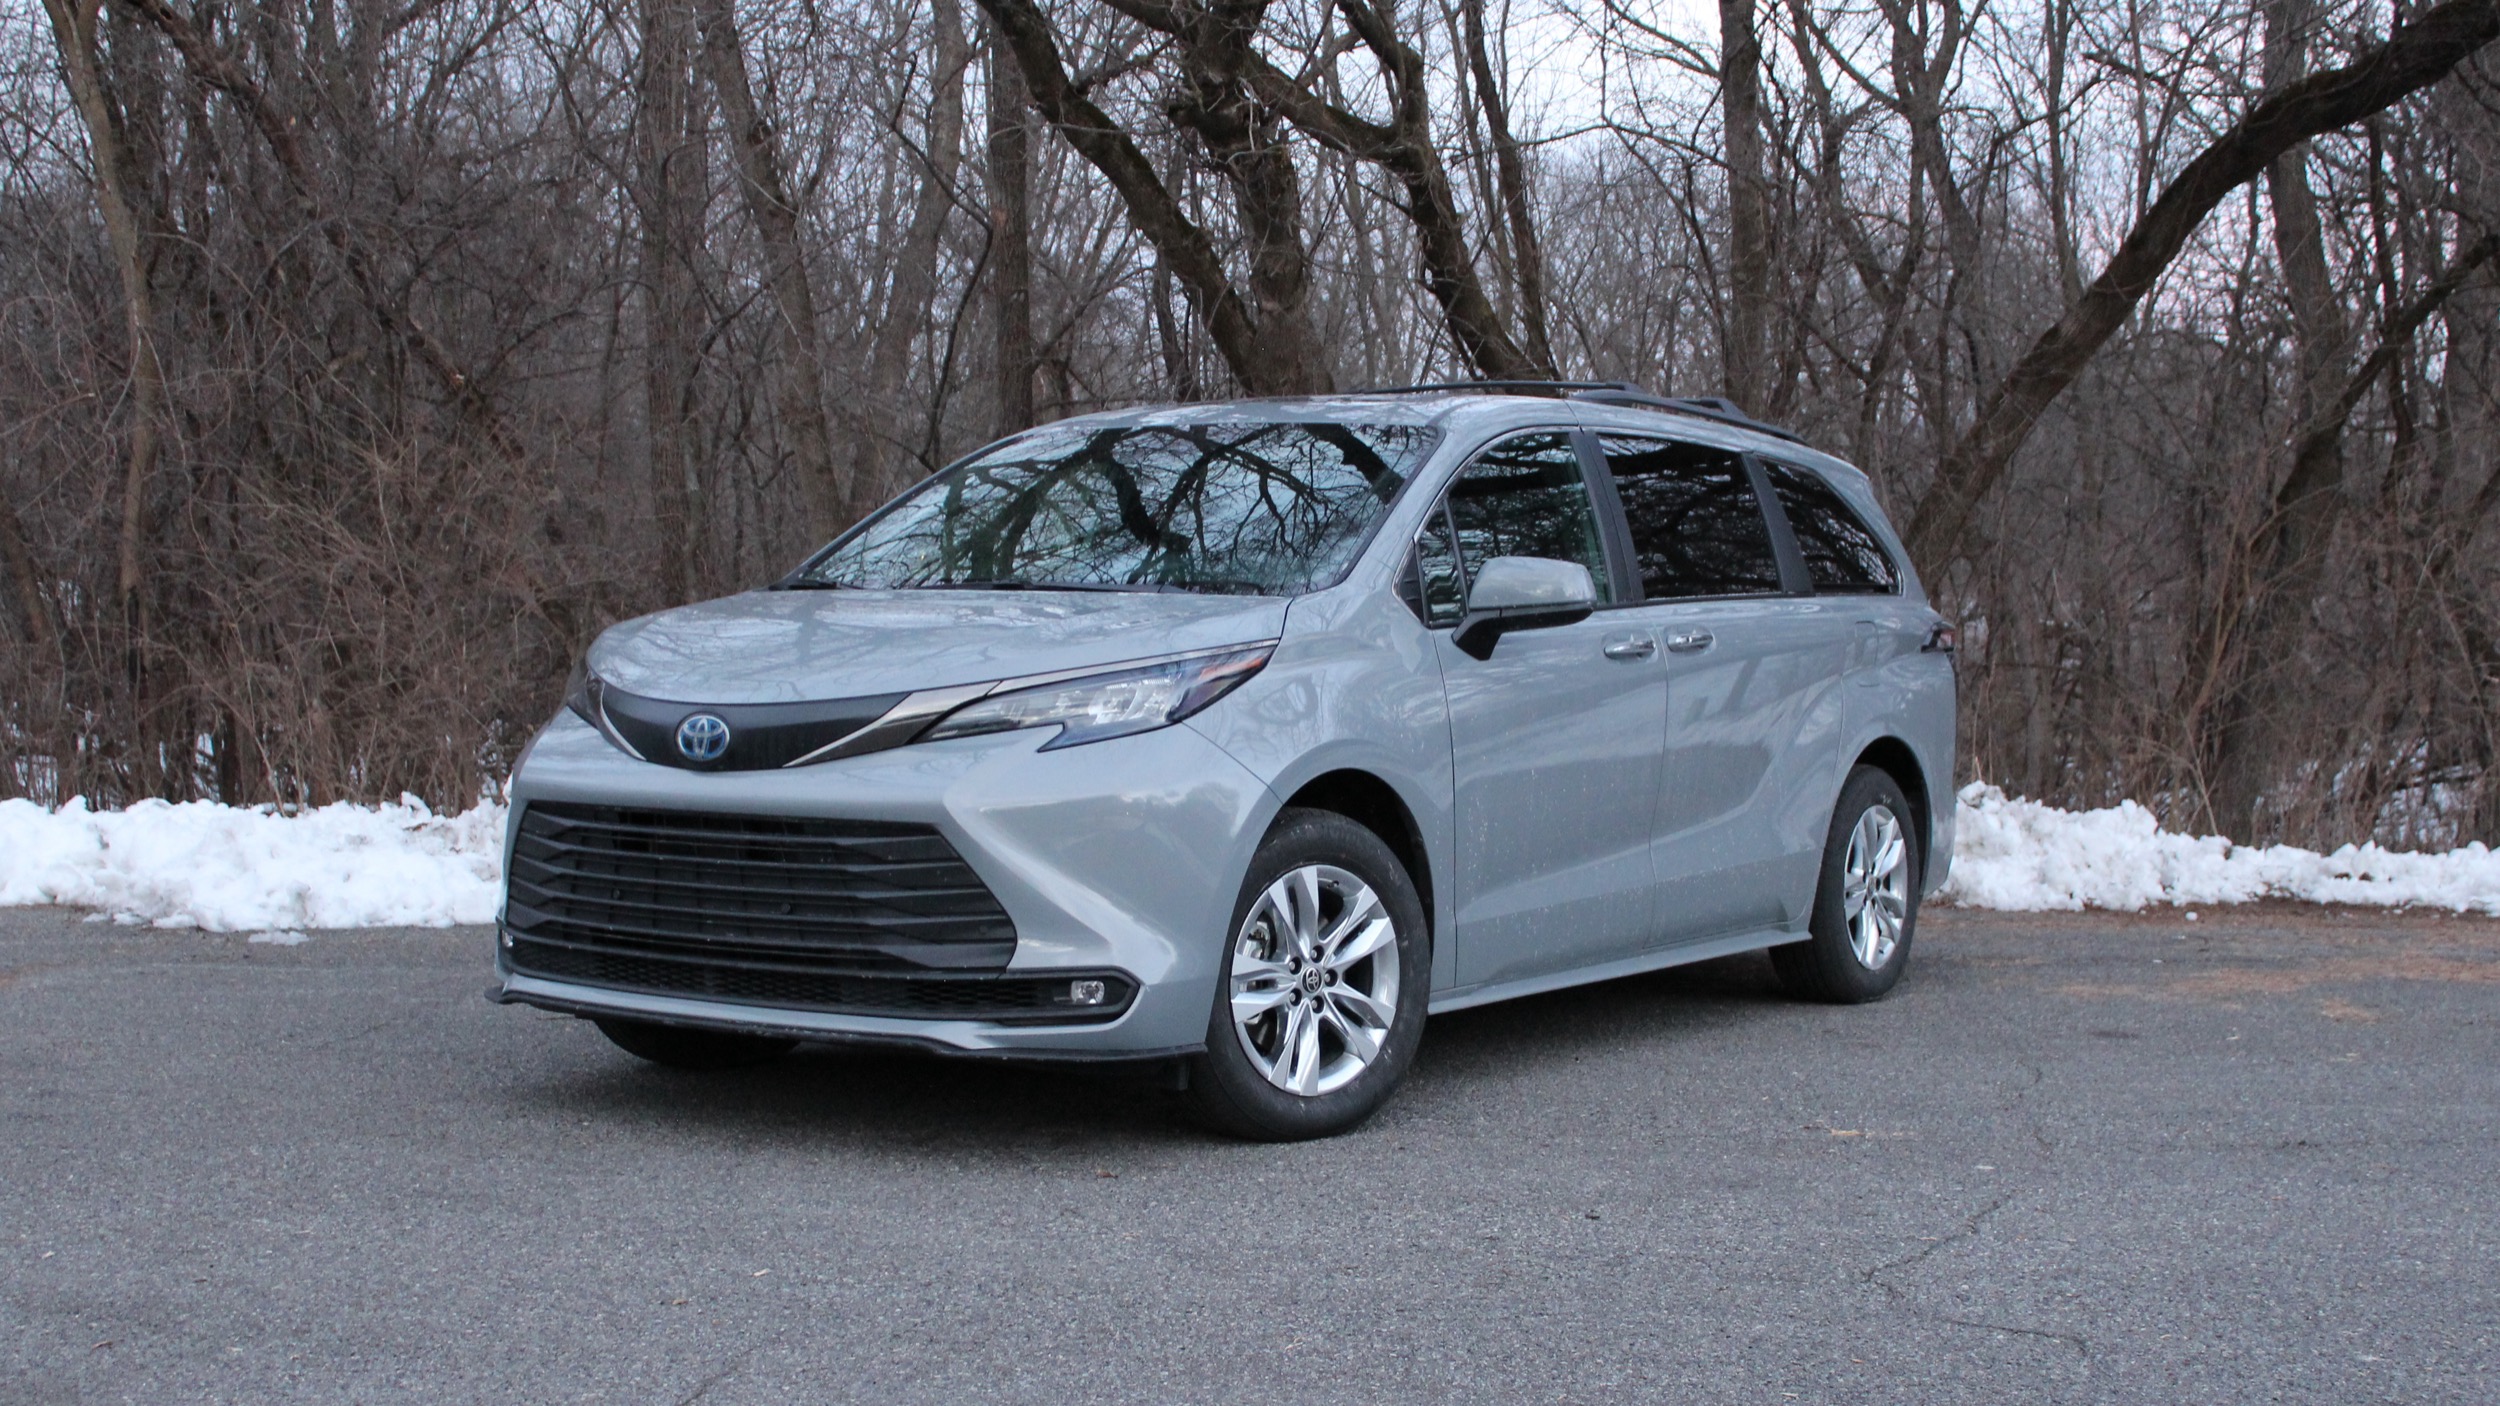 2022 Toyota Sienna Woodland Edition First Drive Review Not woodsy